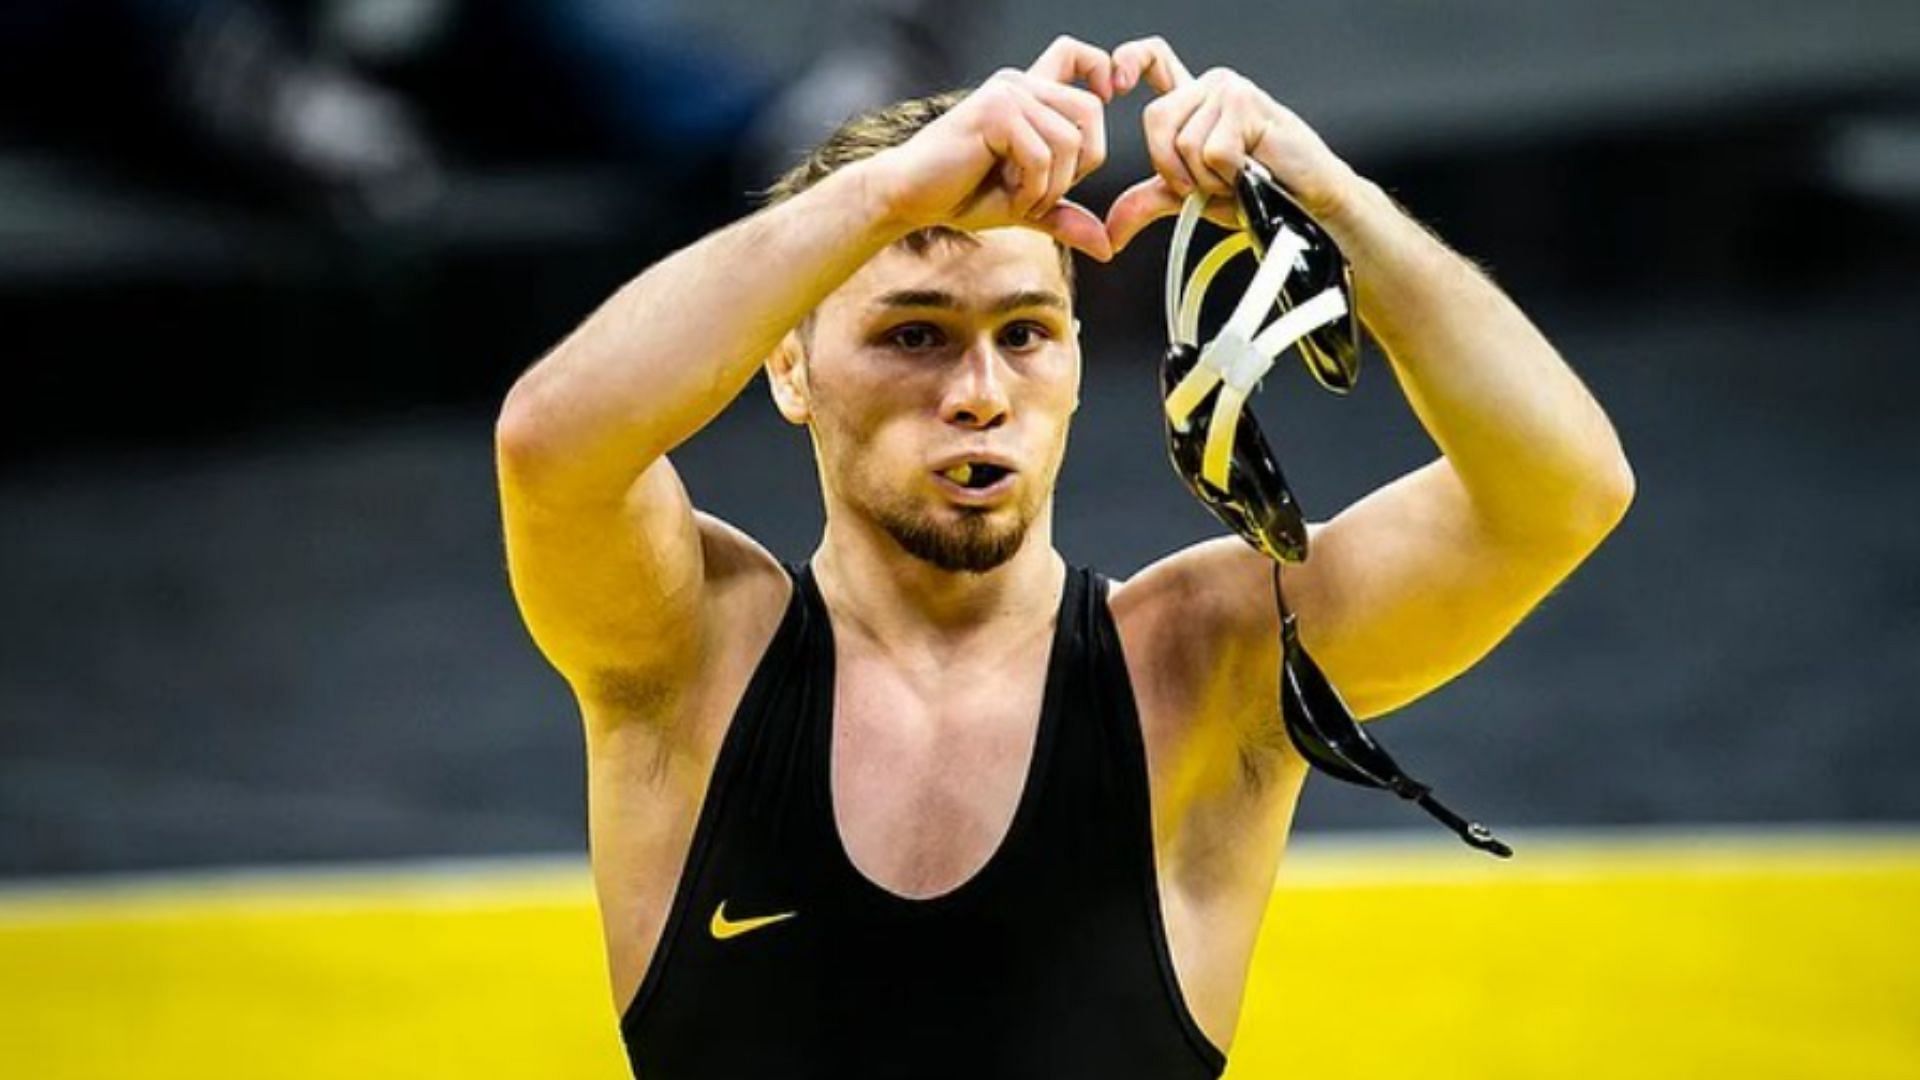 Did Spencer Lee participate in the Olympics? Here is his impressive  wrestling record